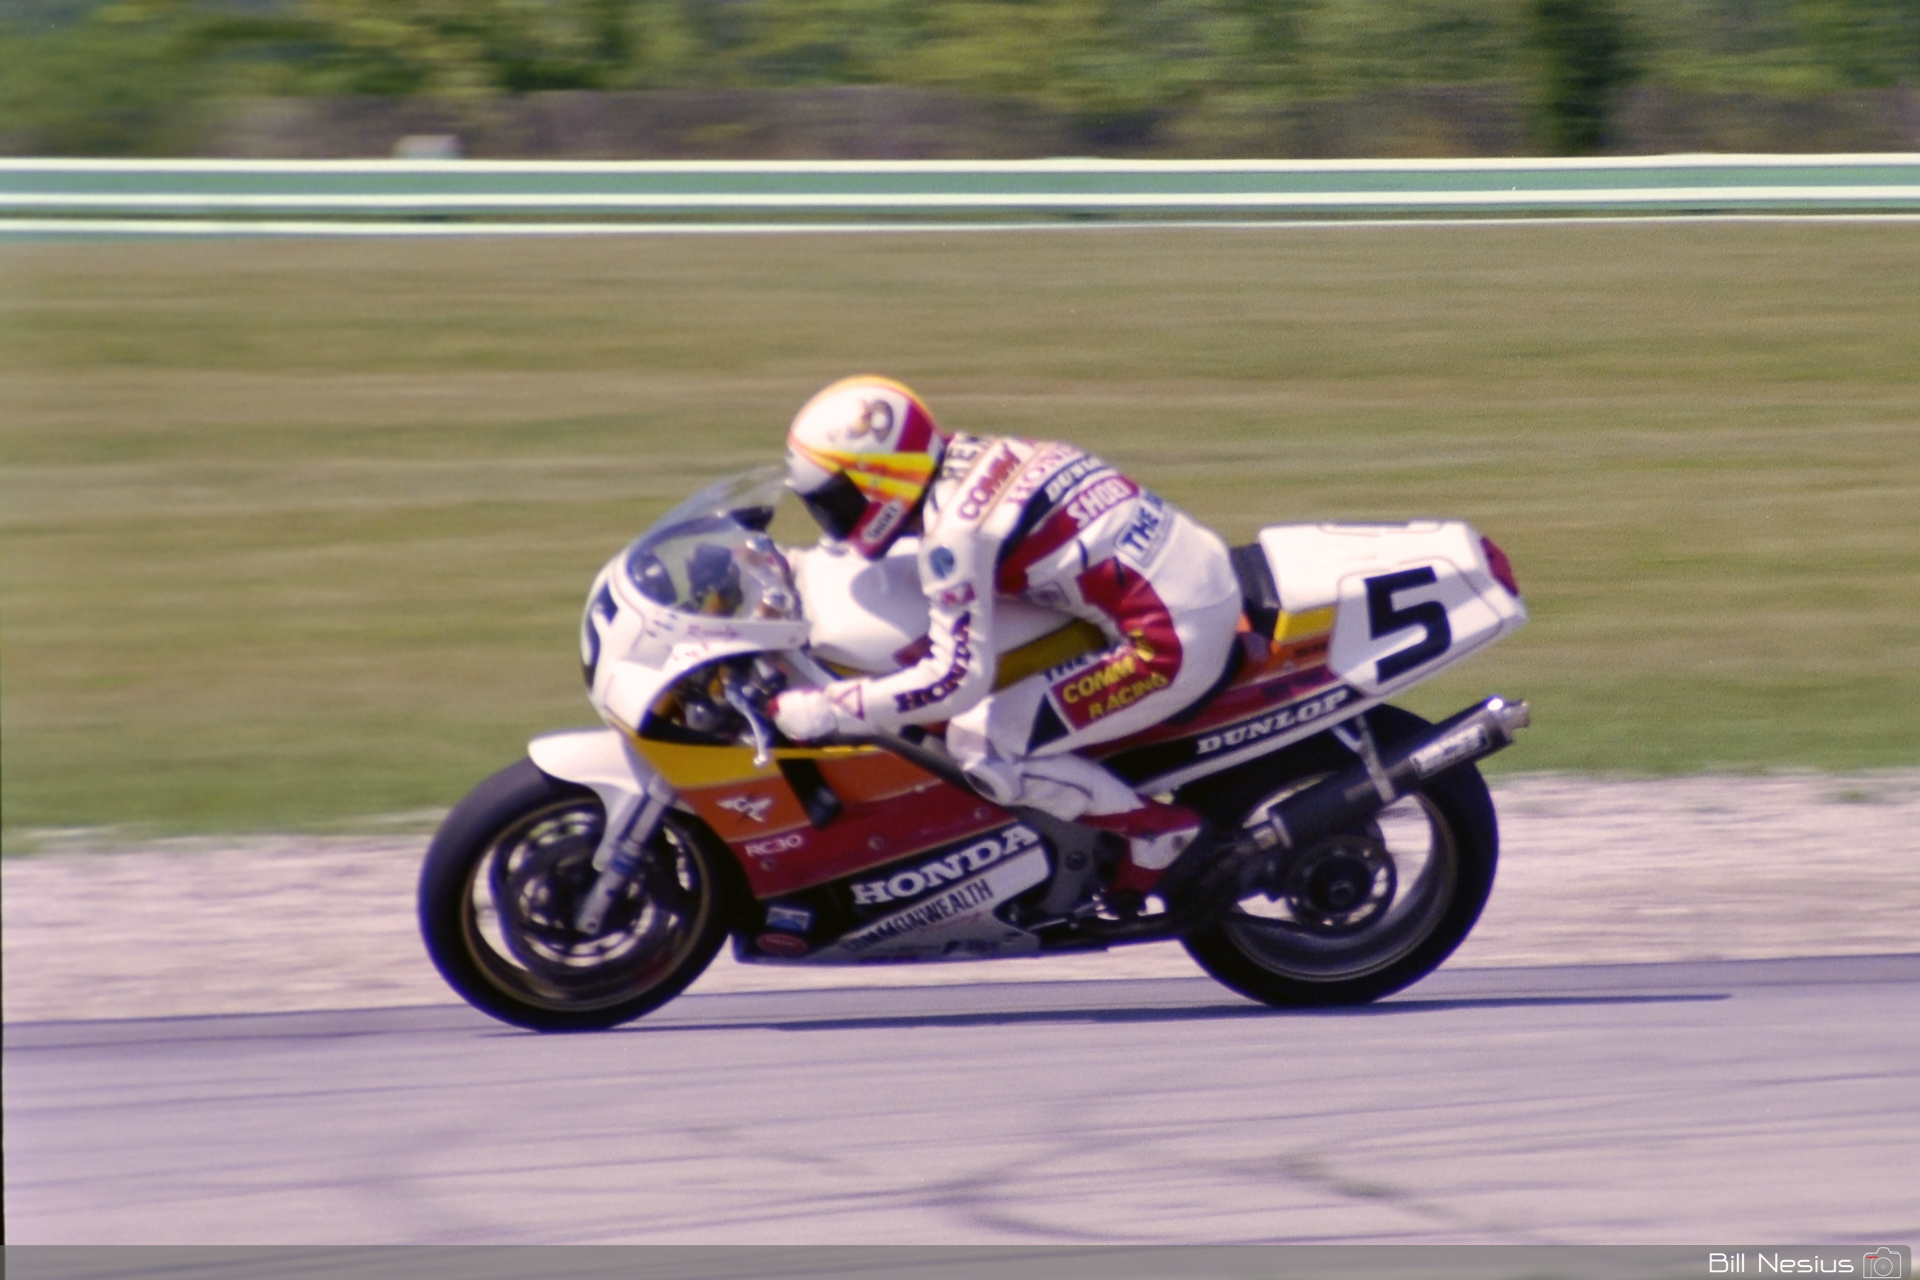 Randy Renfrow on the Number 5 Commonwealth Racing Honda RC30
 / FLM_6421 / 